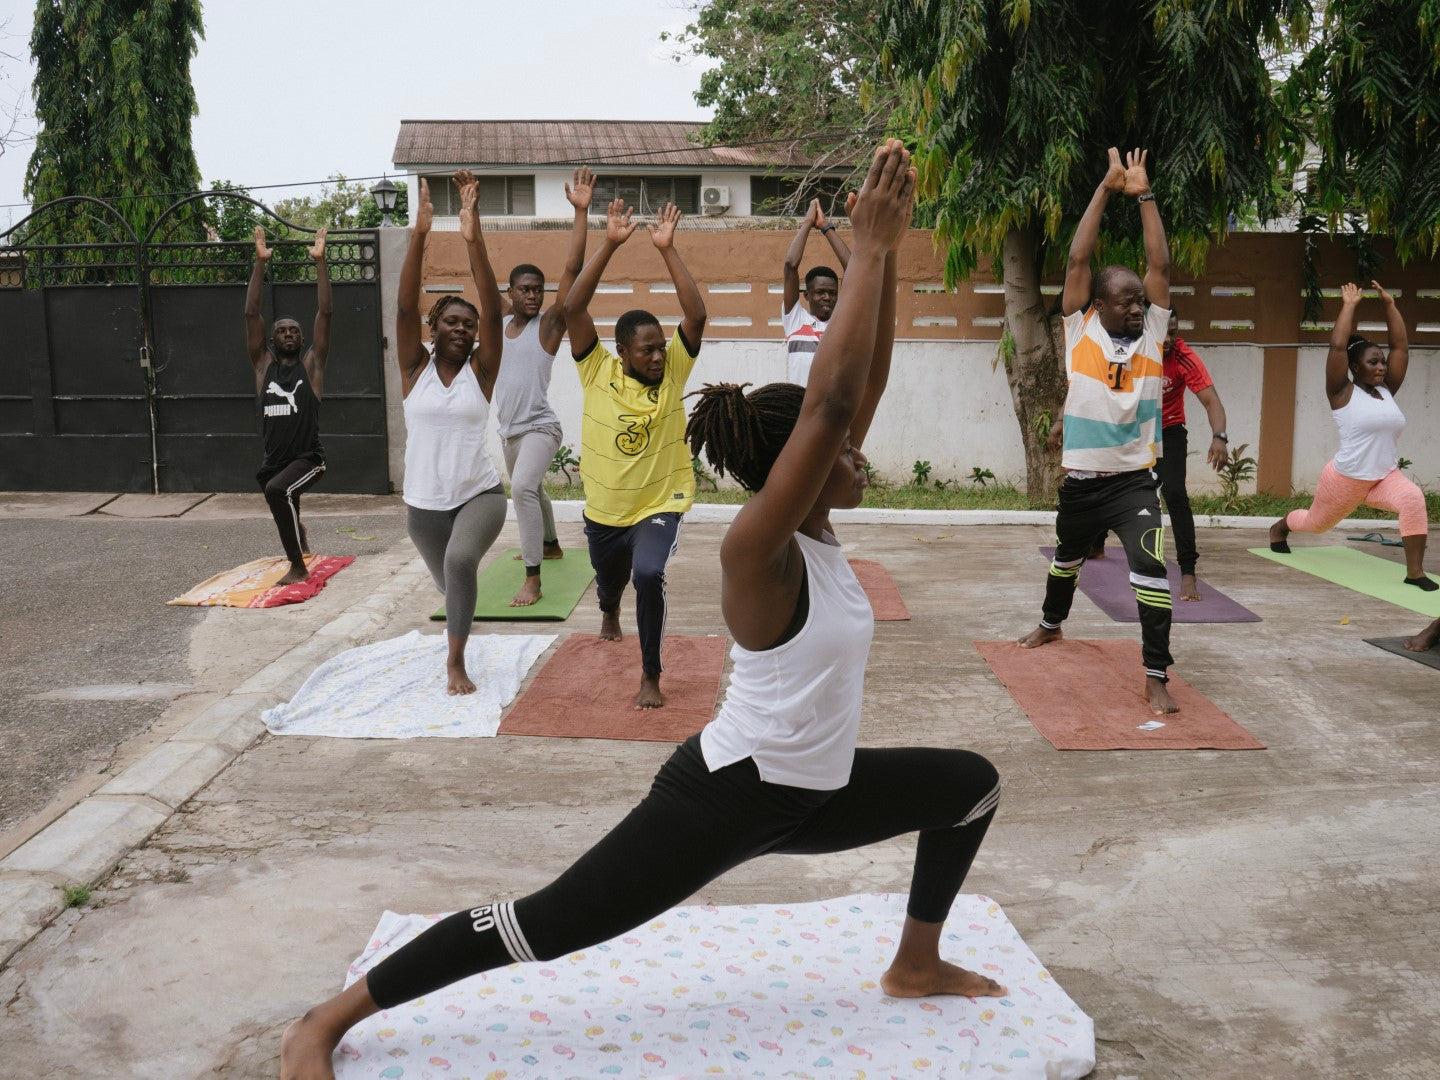 Team members participating in an outdoor yoga class at Accra headquarters.